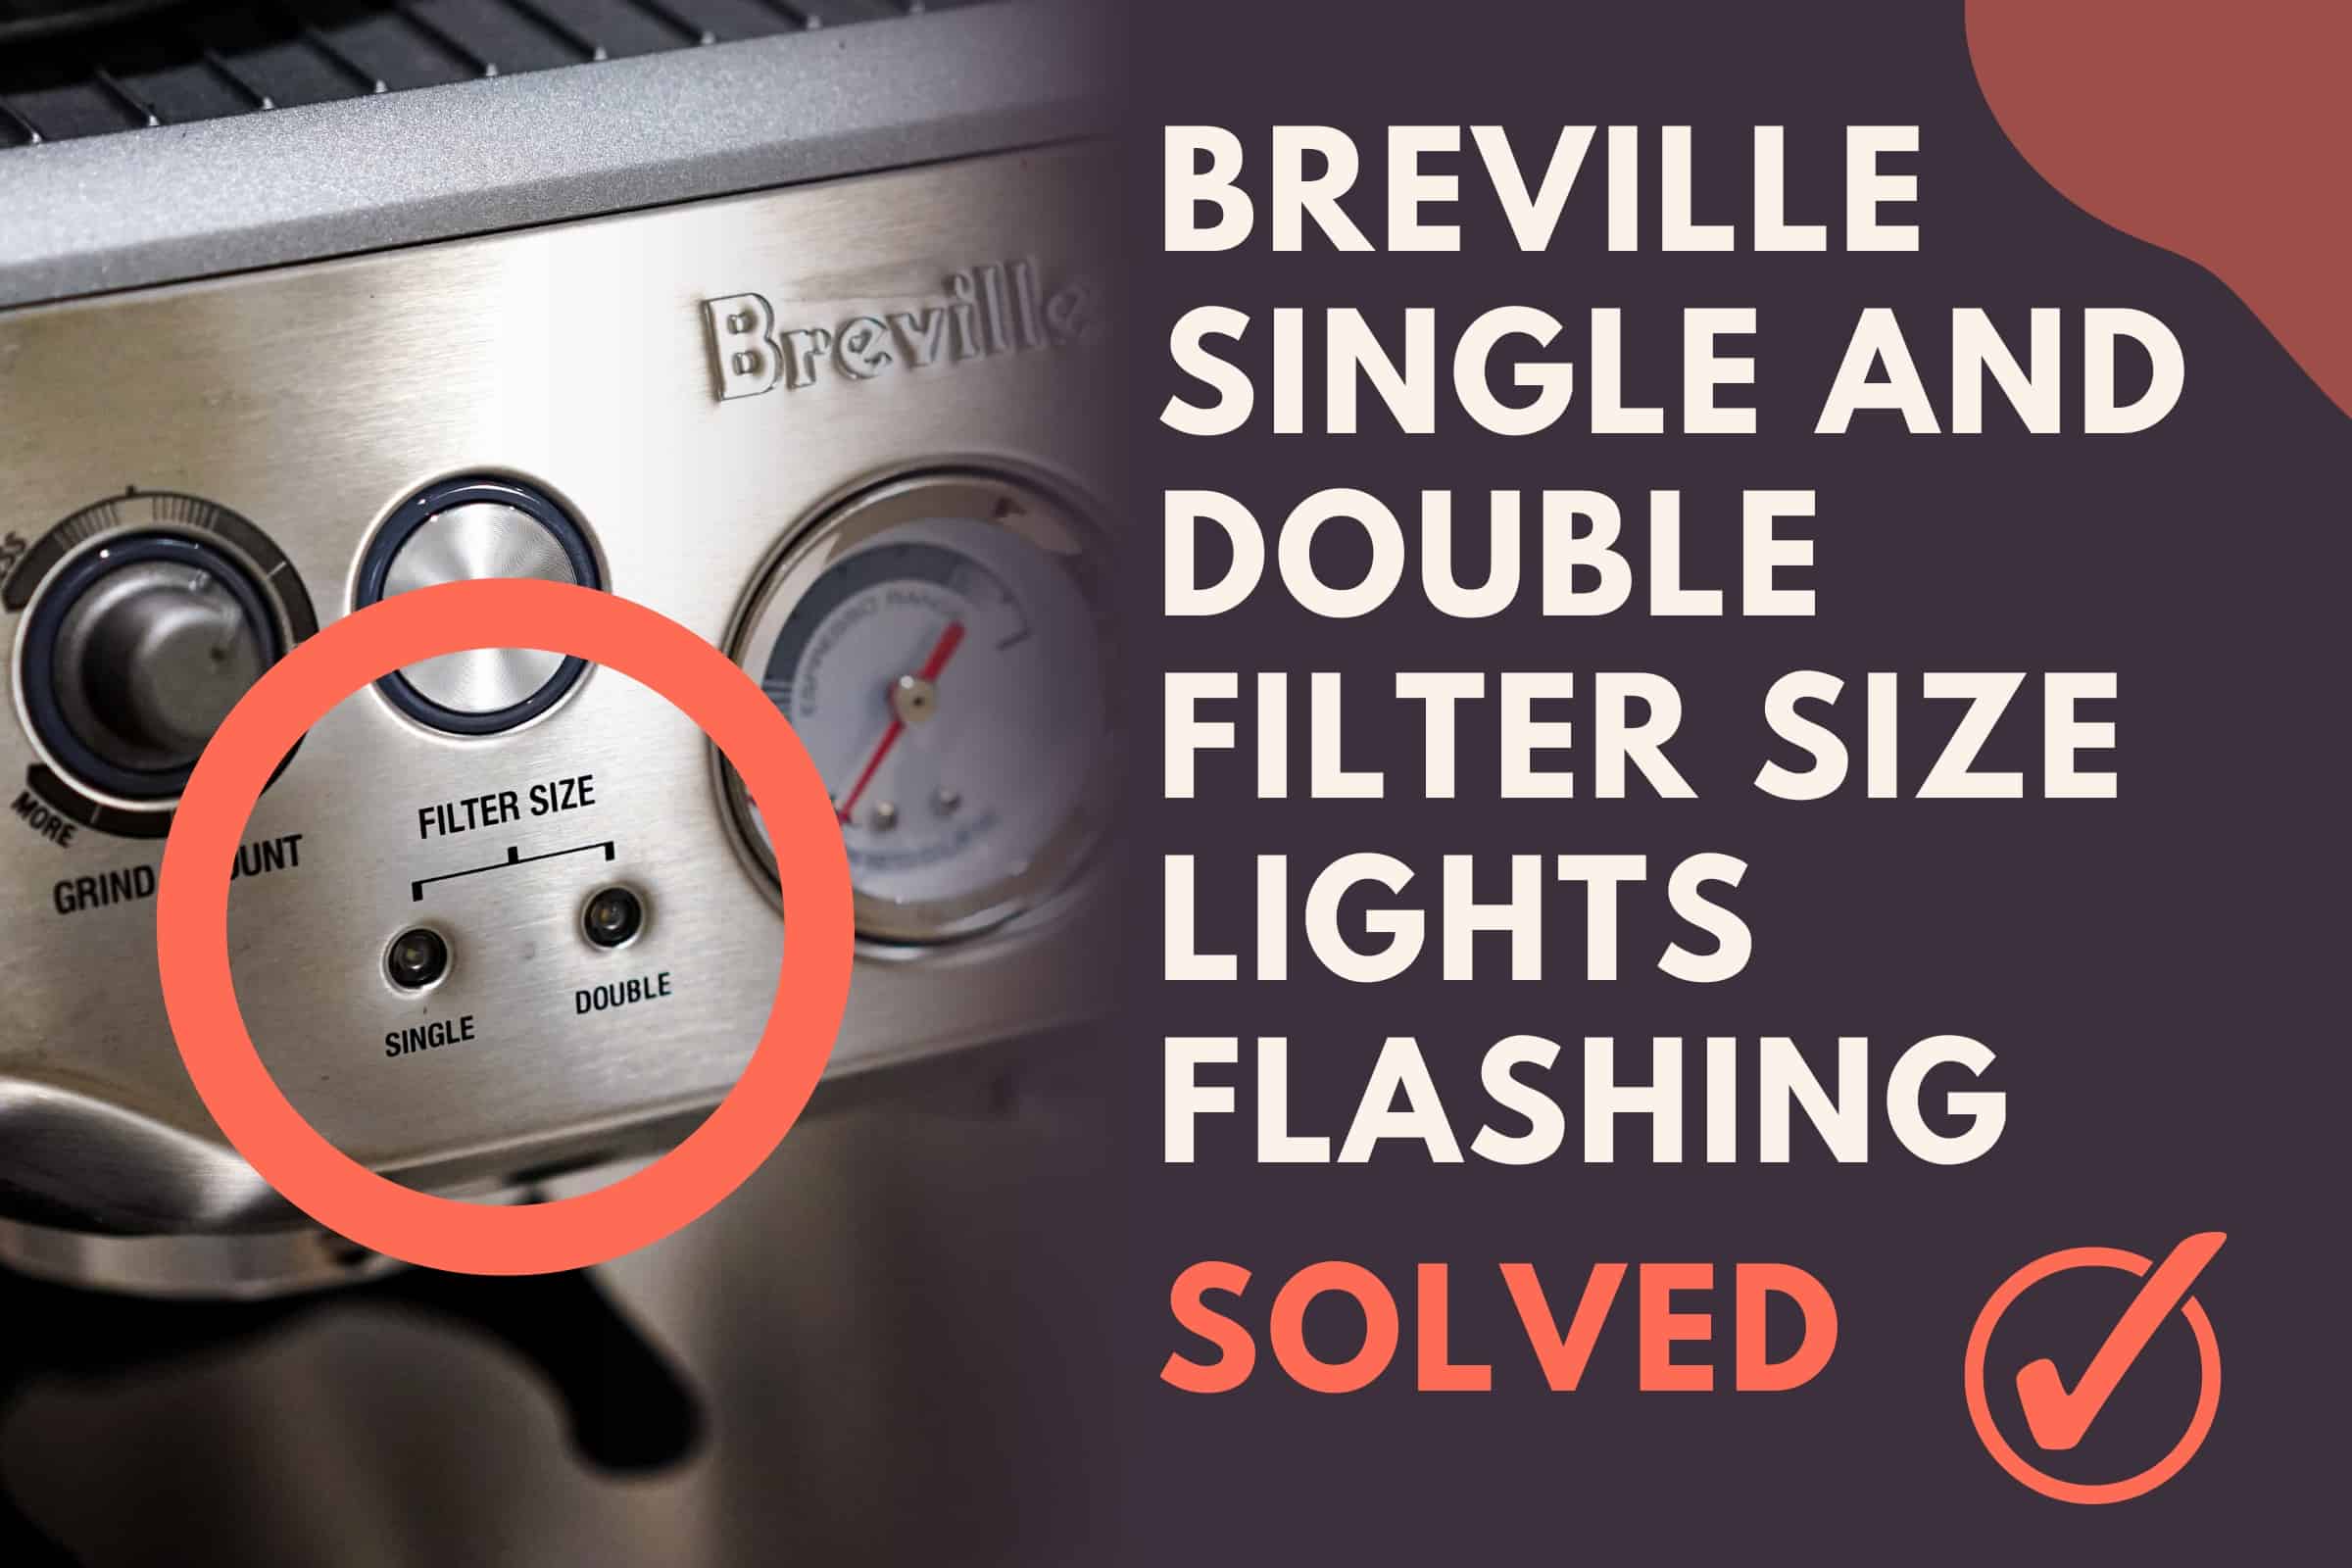 Breville Single And Double Filter Size Lights Flashing